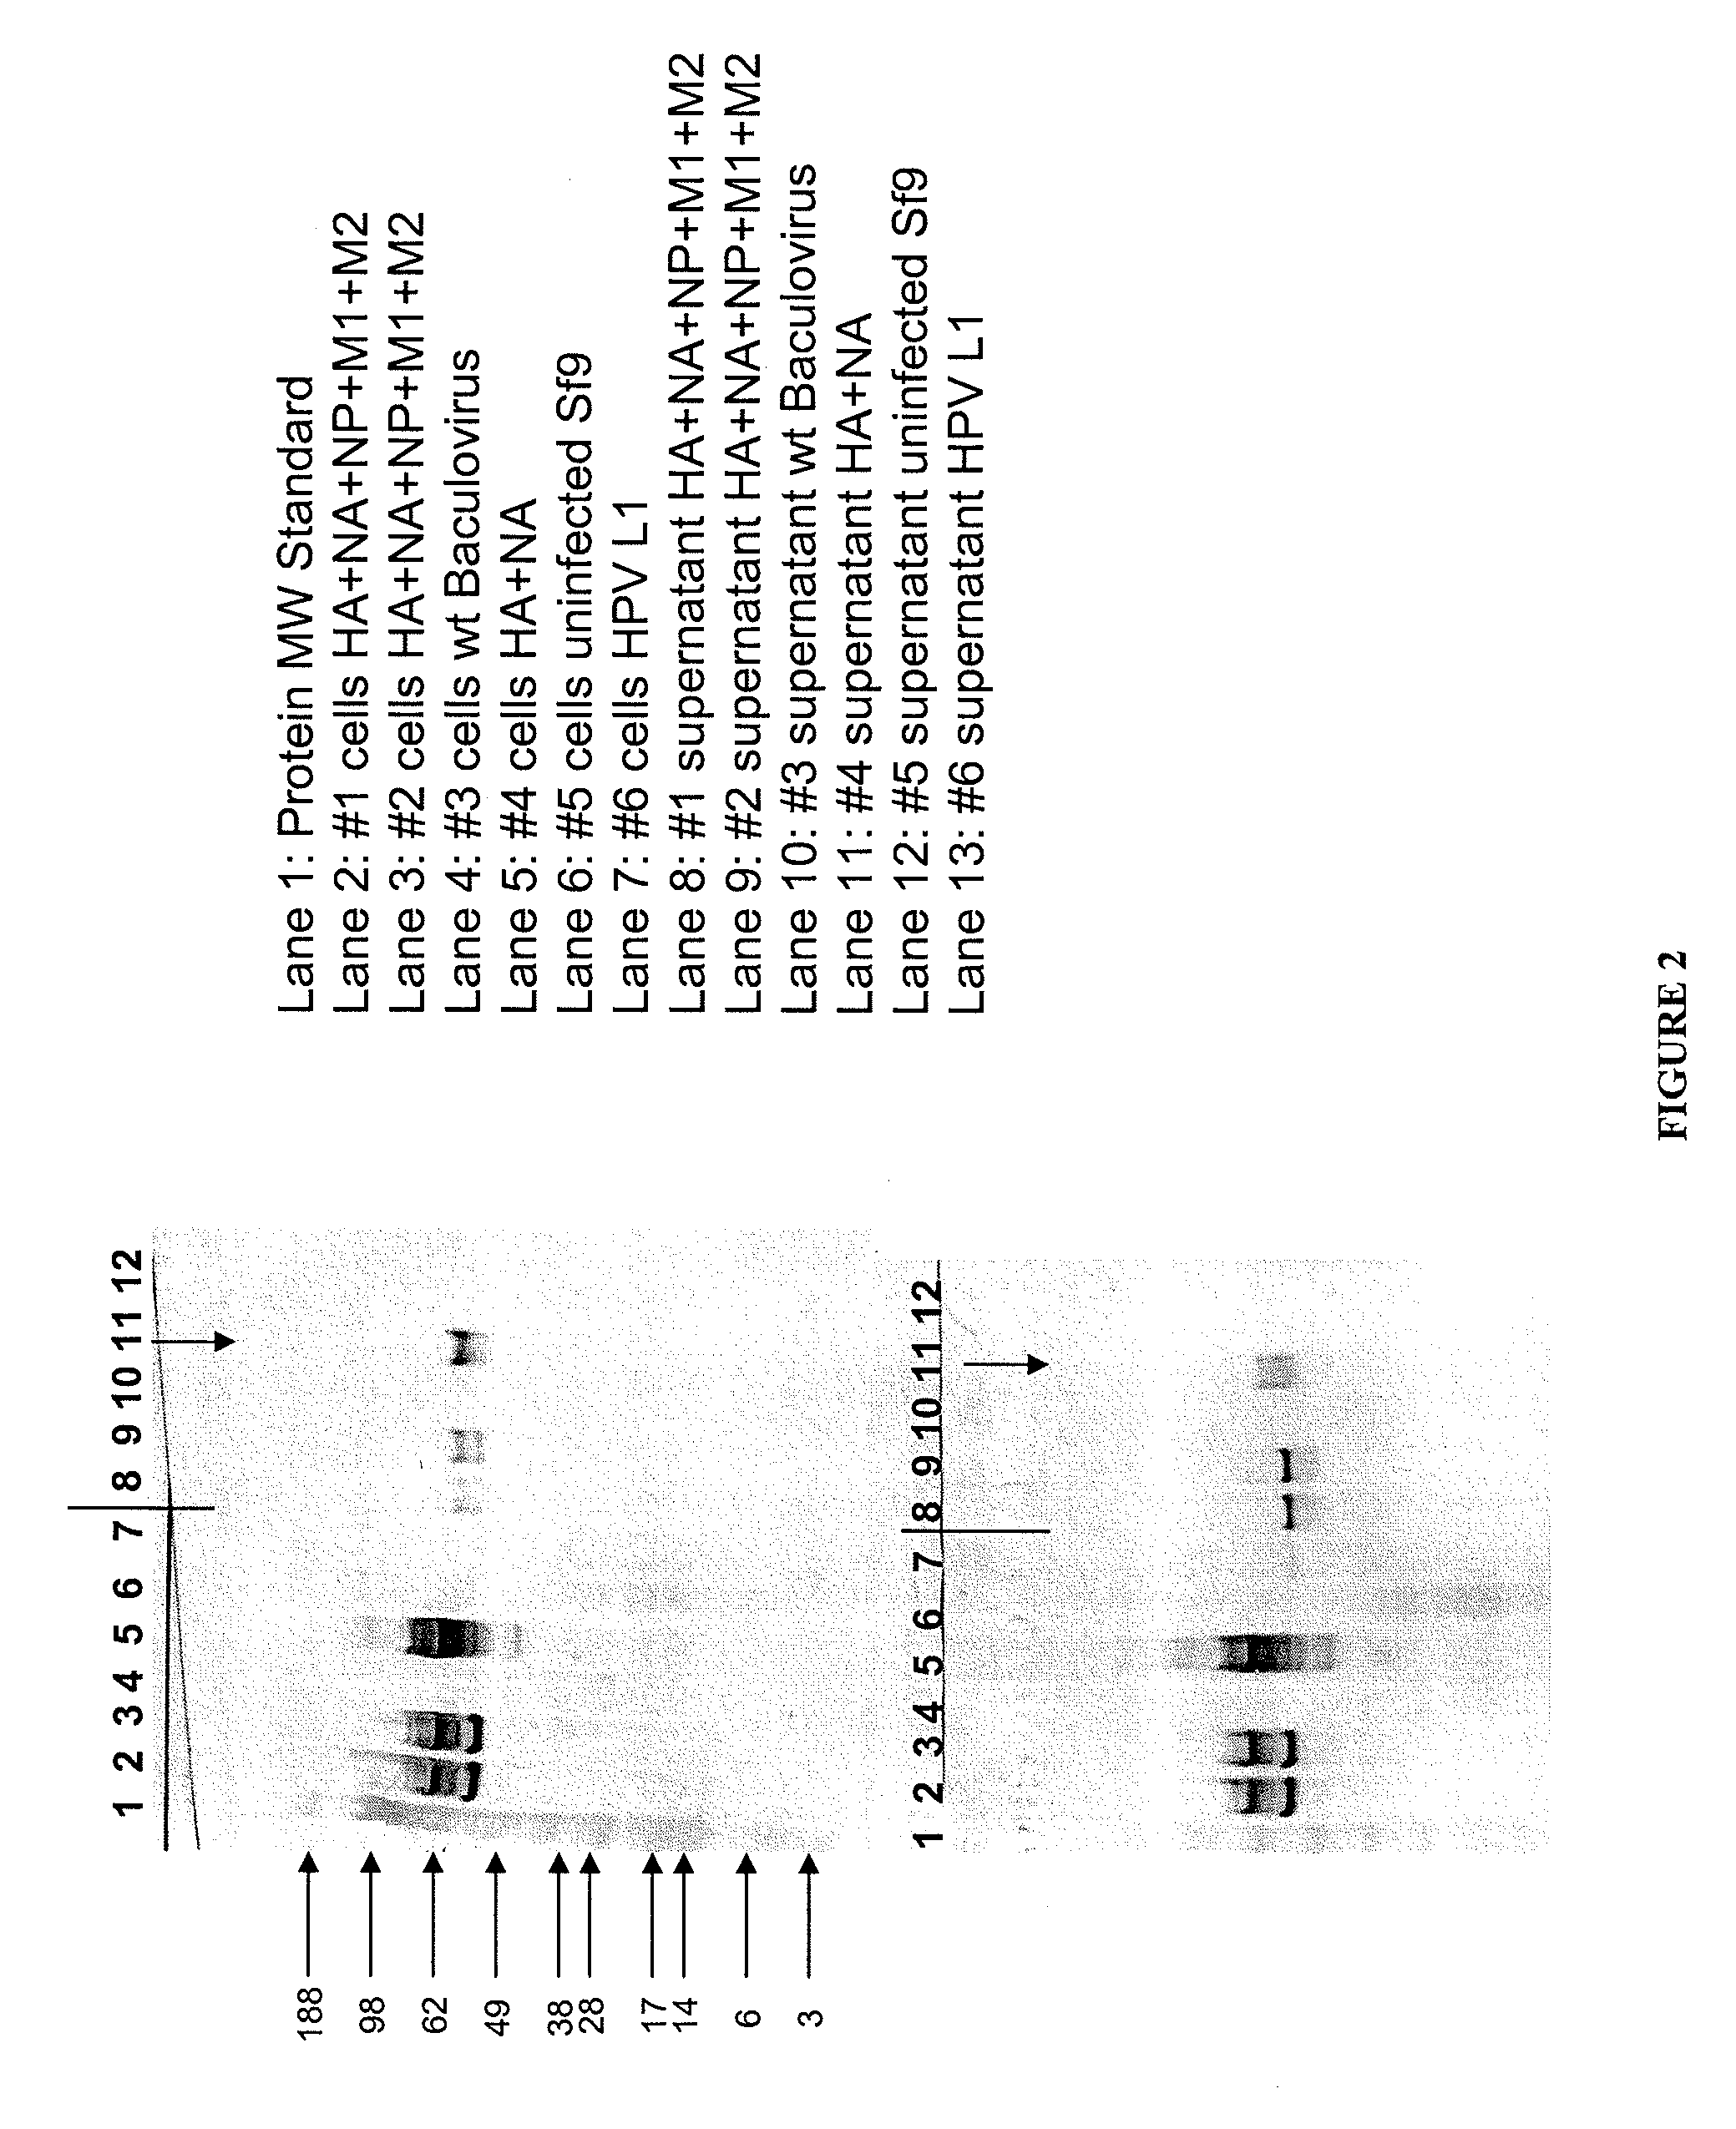 VLPs derived from cells that do not express a viral matrix or core protein